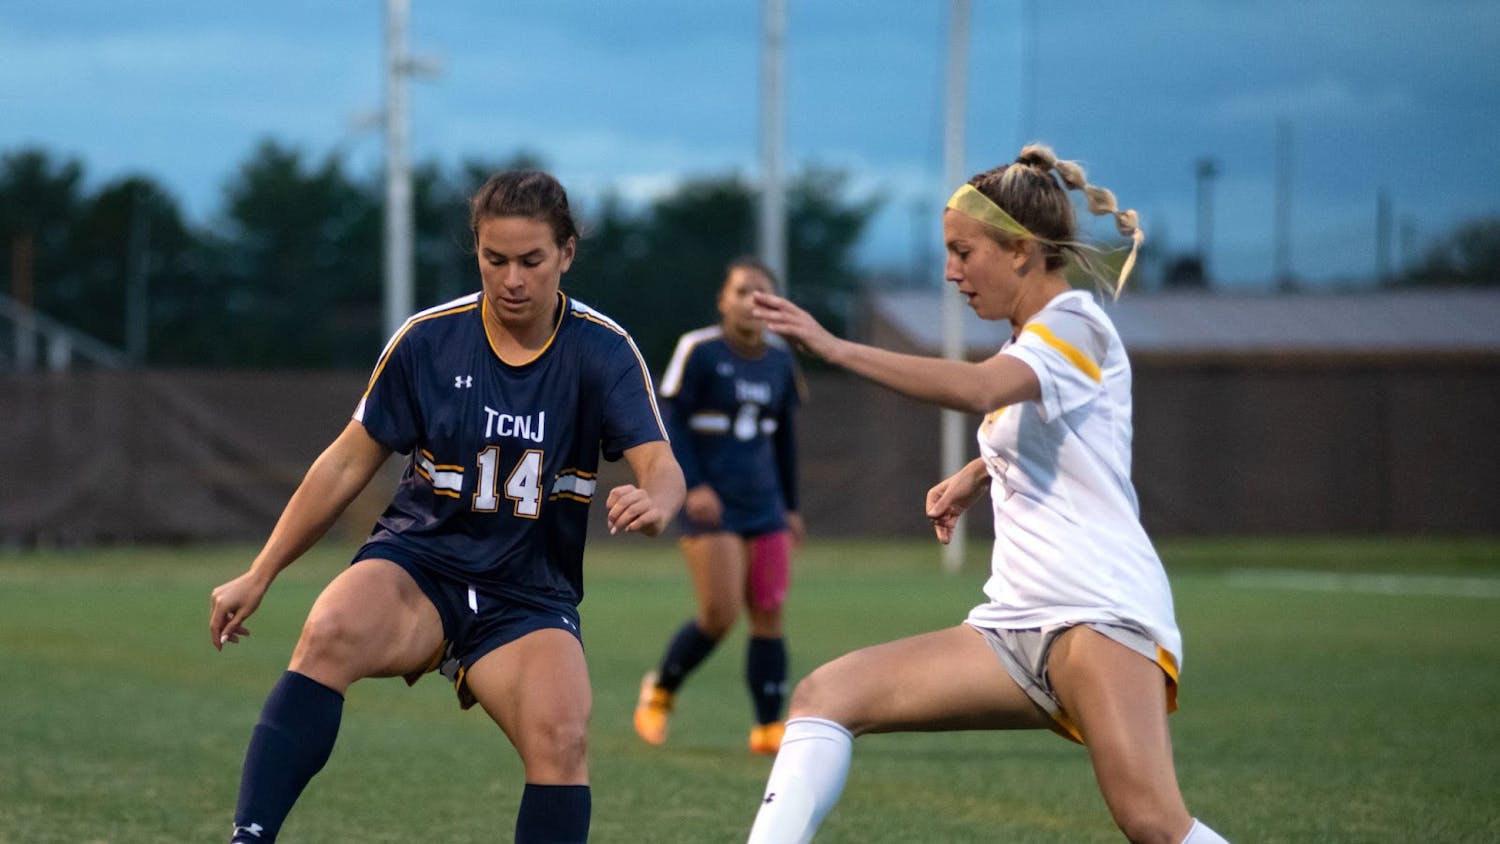 The Lions ended their season with a record of 14 wins, three losses and two ties (Photo courtesy of Jimmy Alanga, Sports Photographer for TCNJ Athletics).